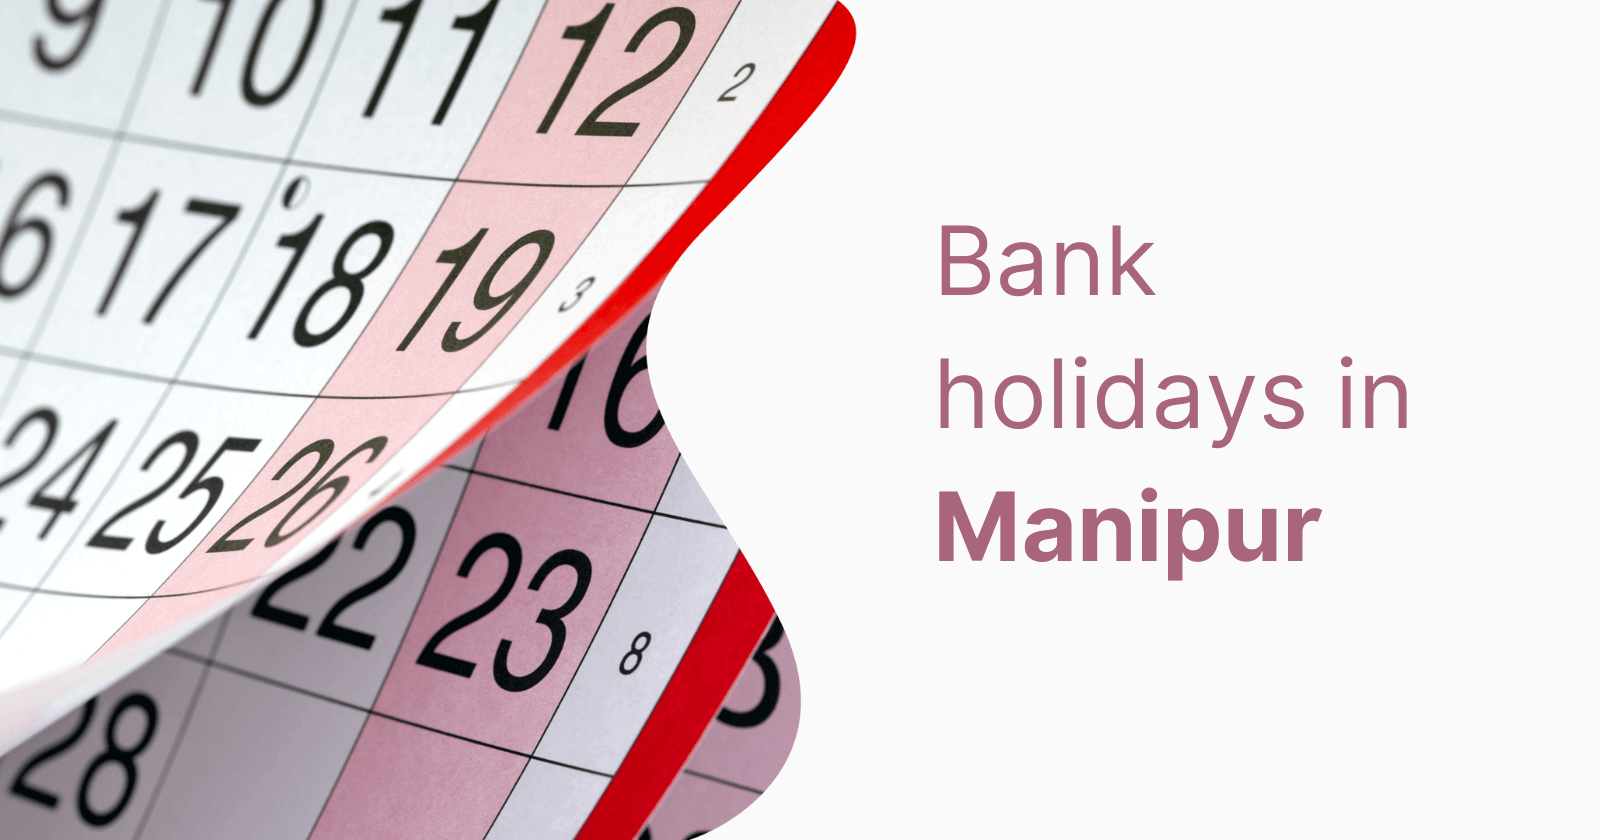 bank holiday in manipur
